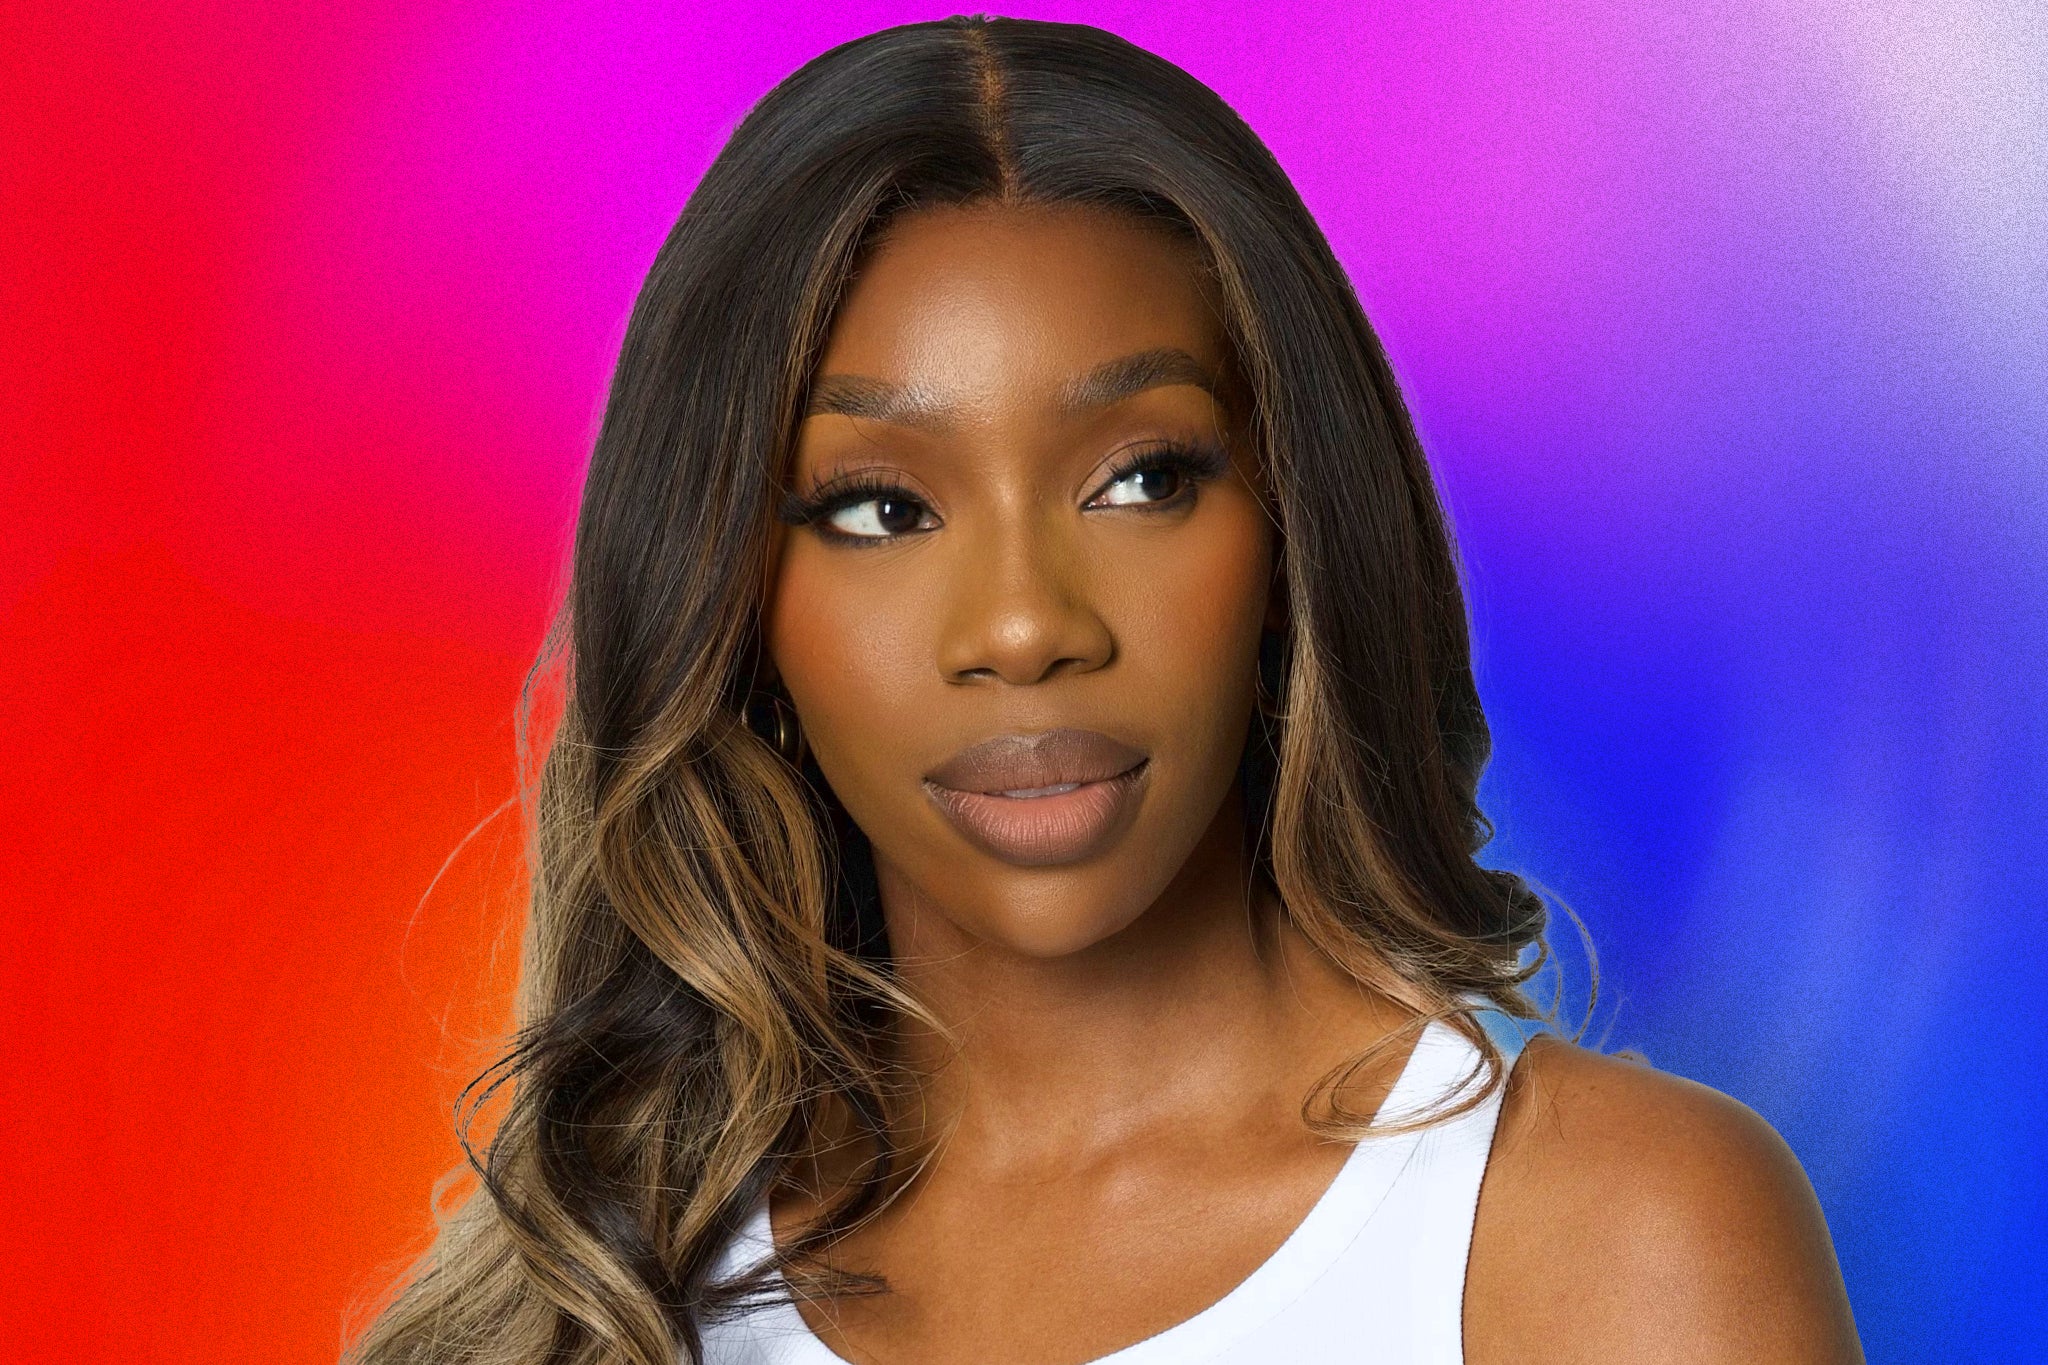 Yewande Biala thought she was unique in never having had an orgasm pic